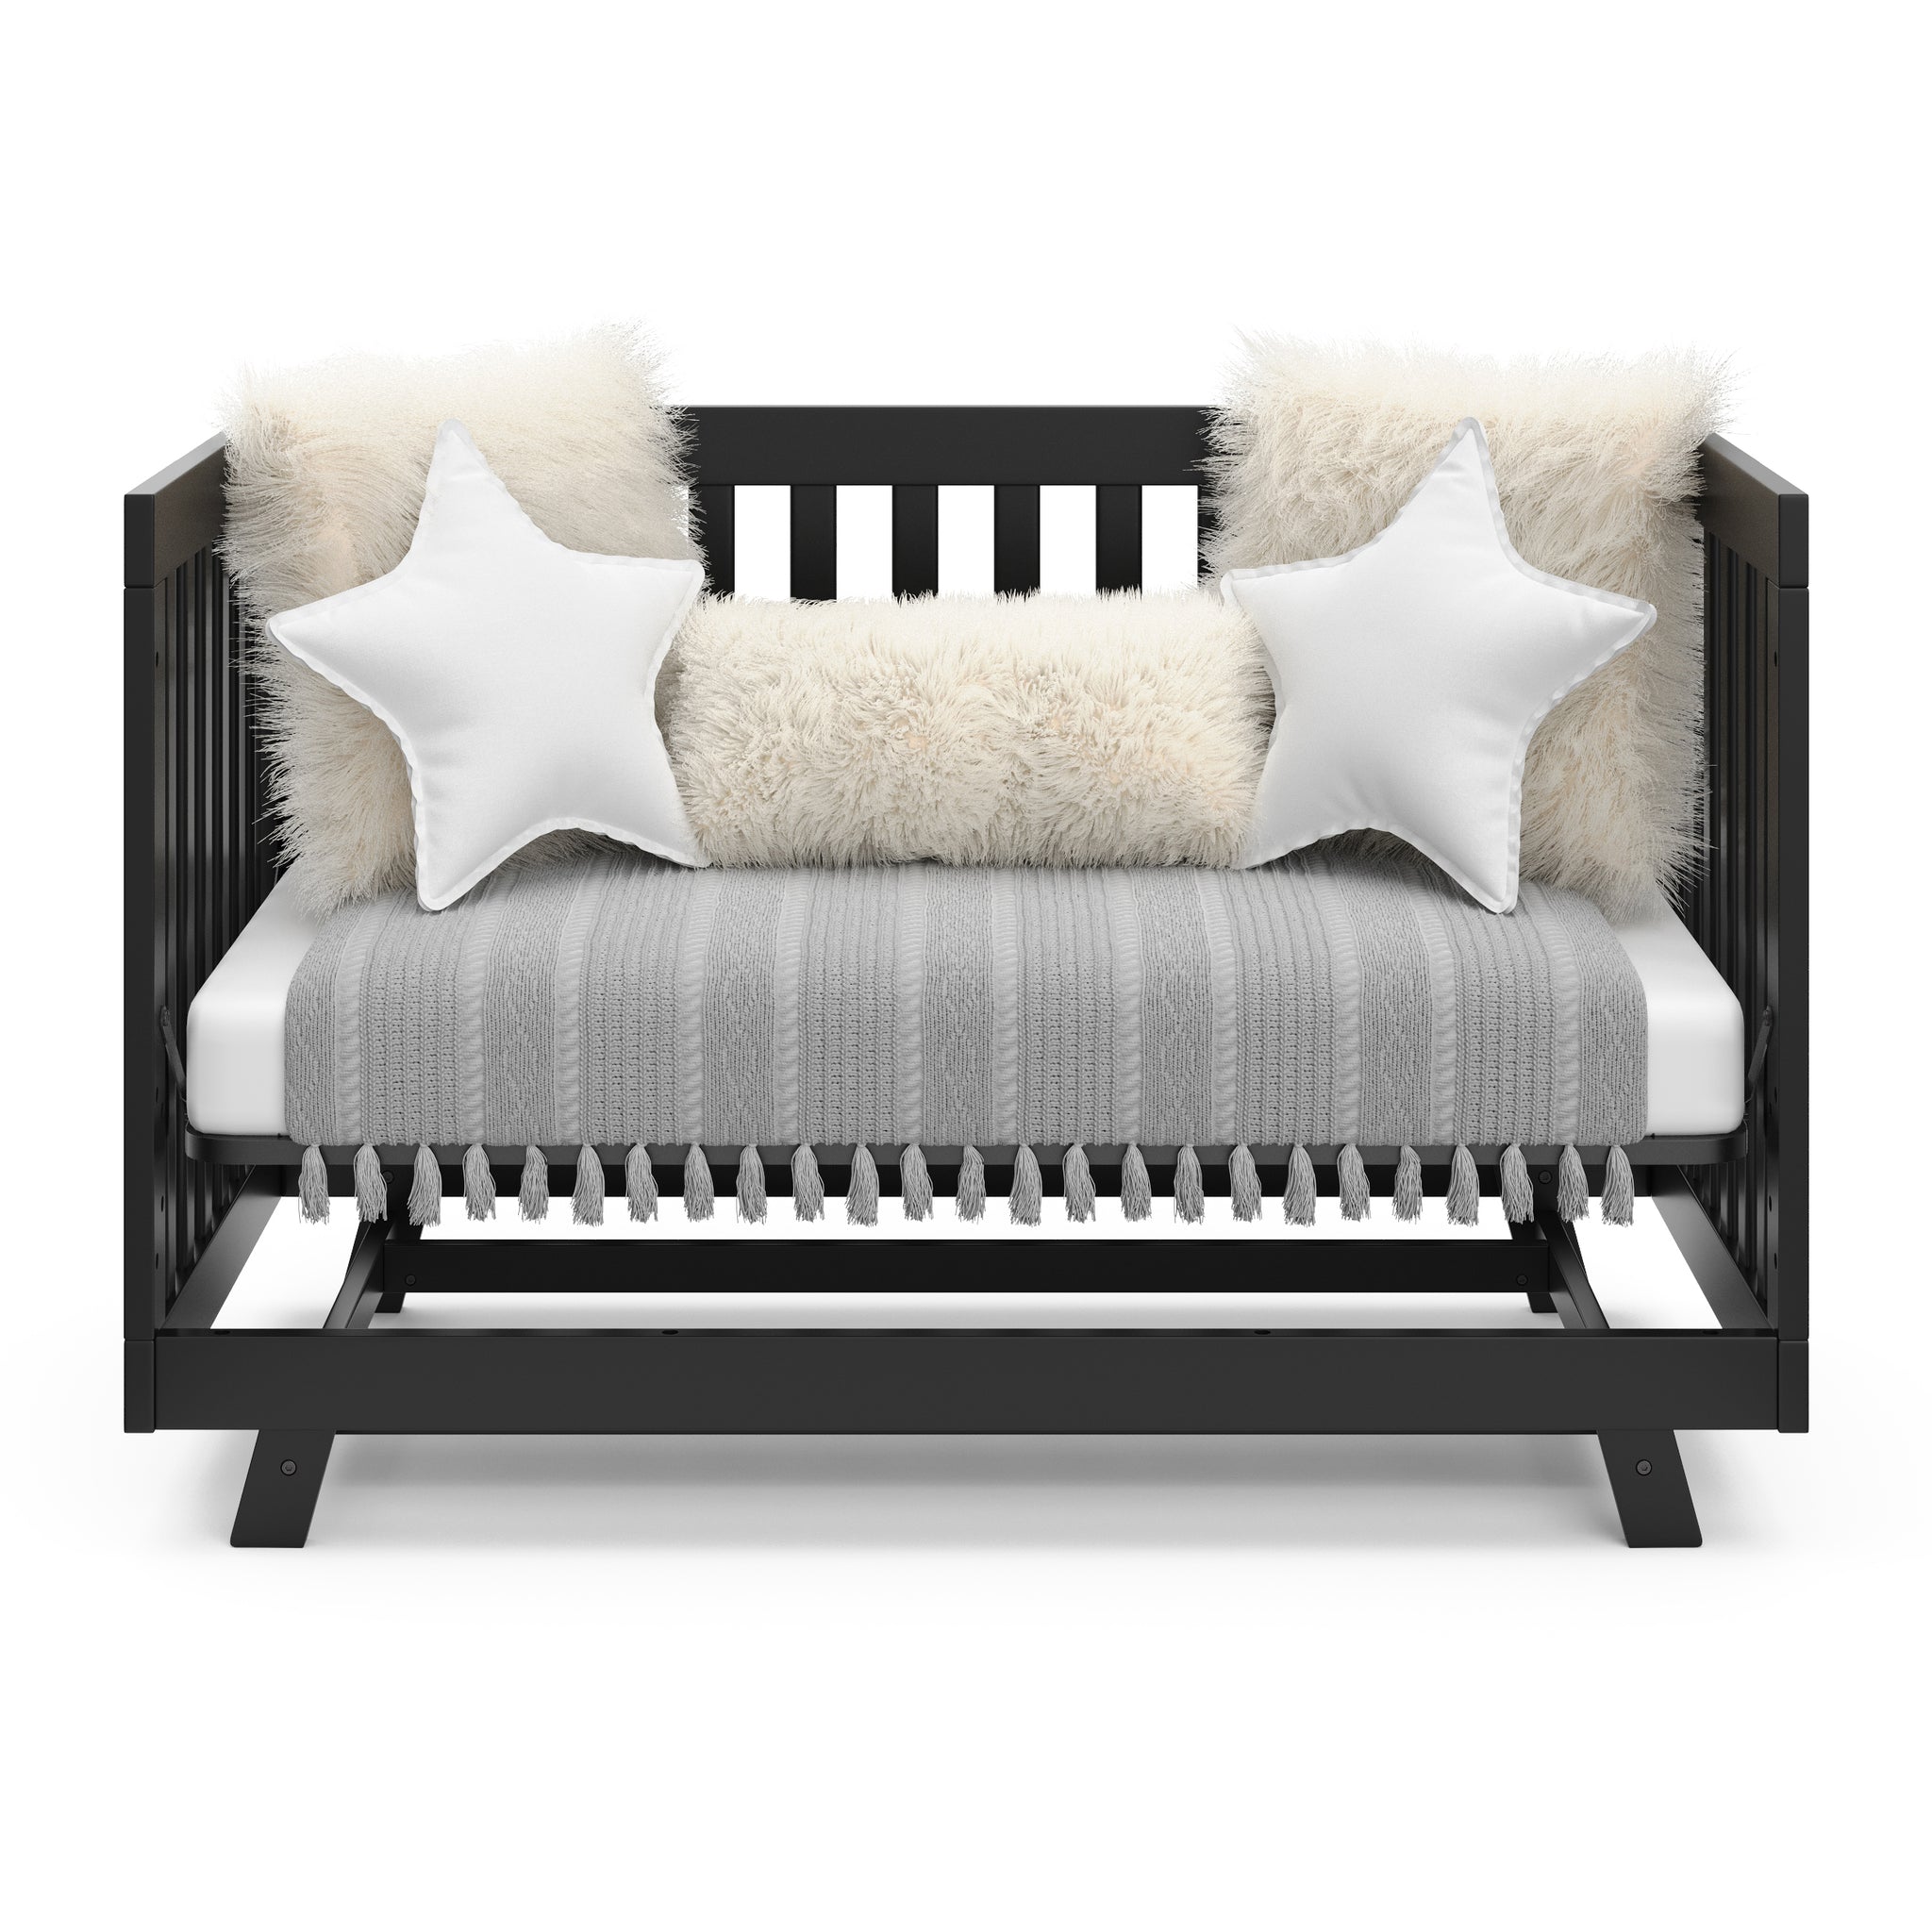 black crib in daybed conversion